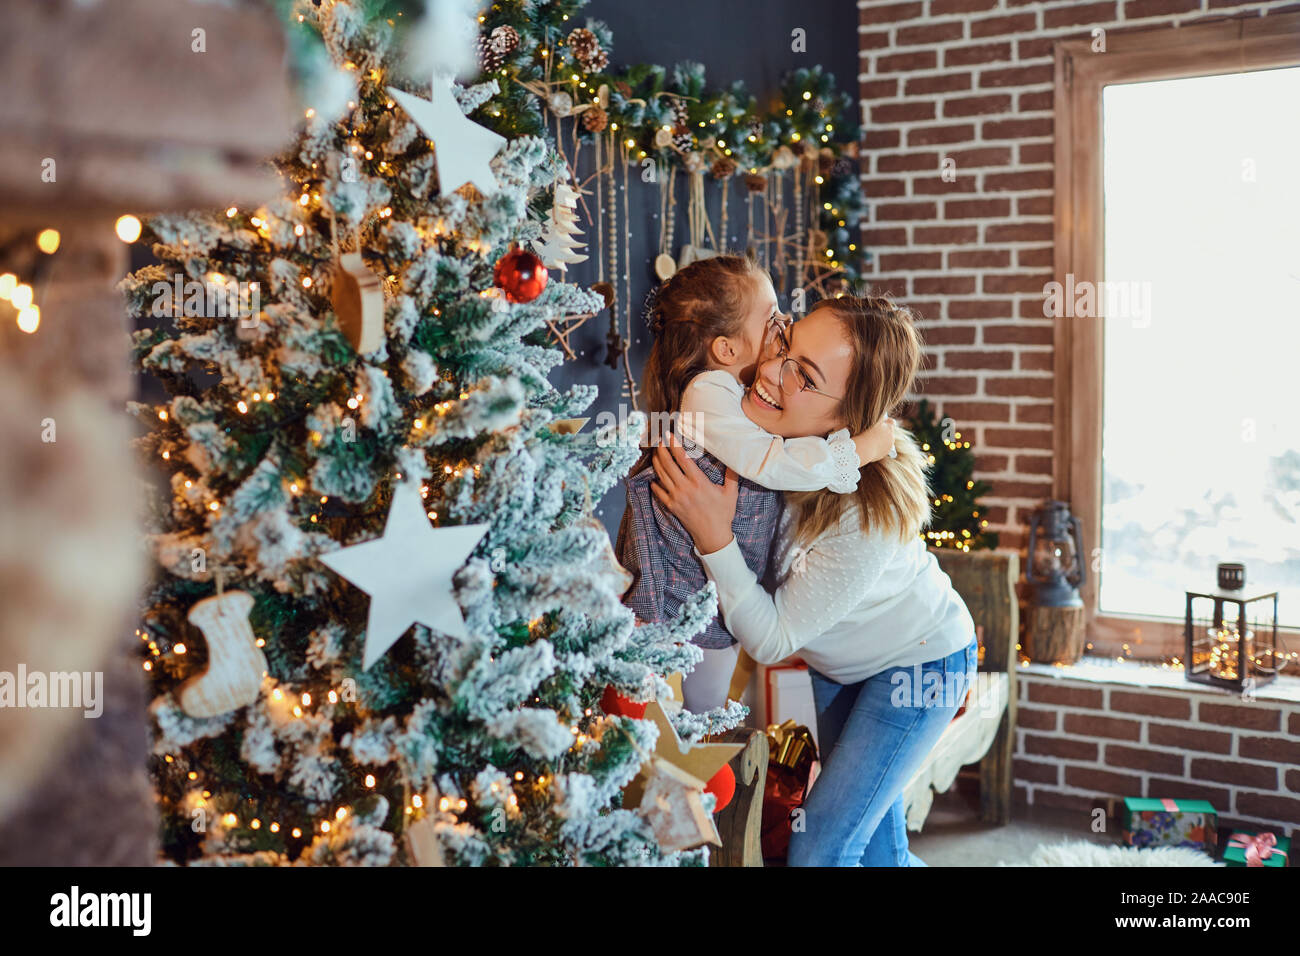 Mother and daughter hugging by the Christmas tree. Stock Photo